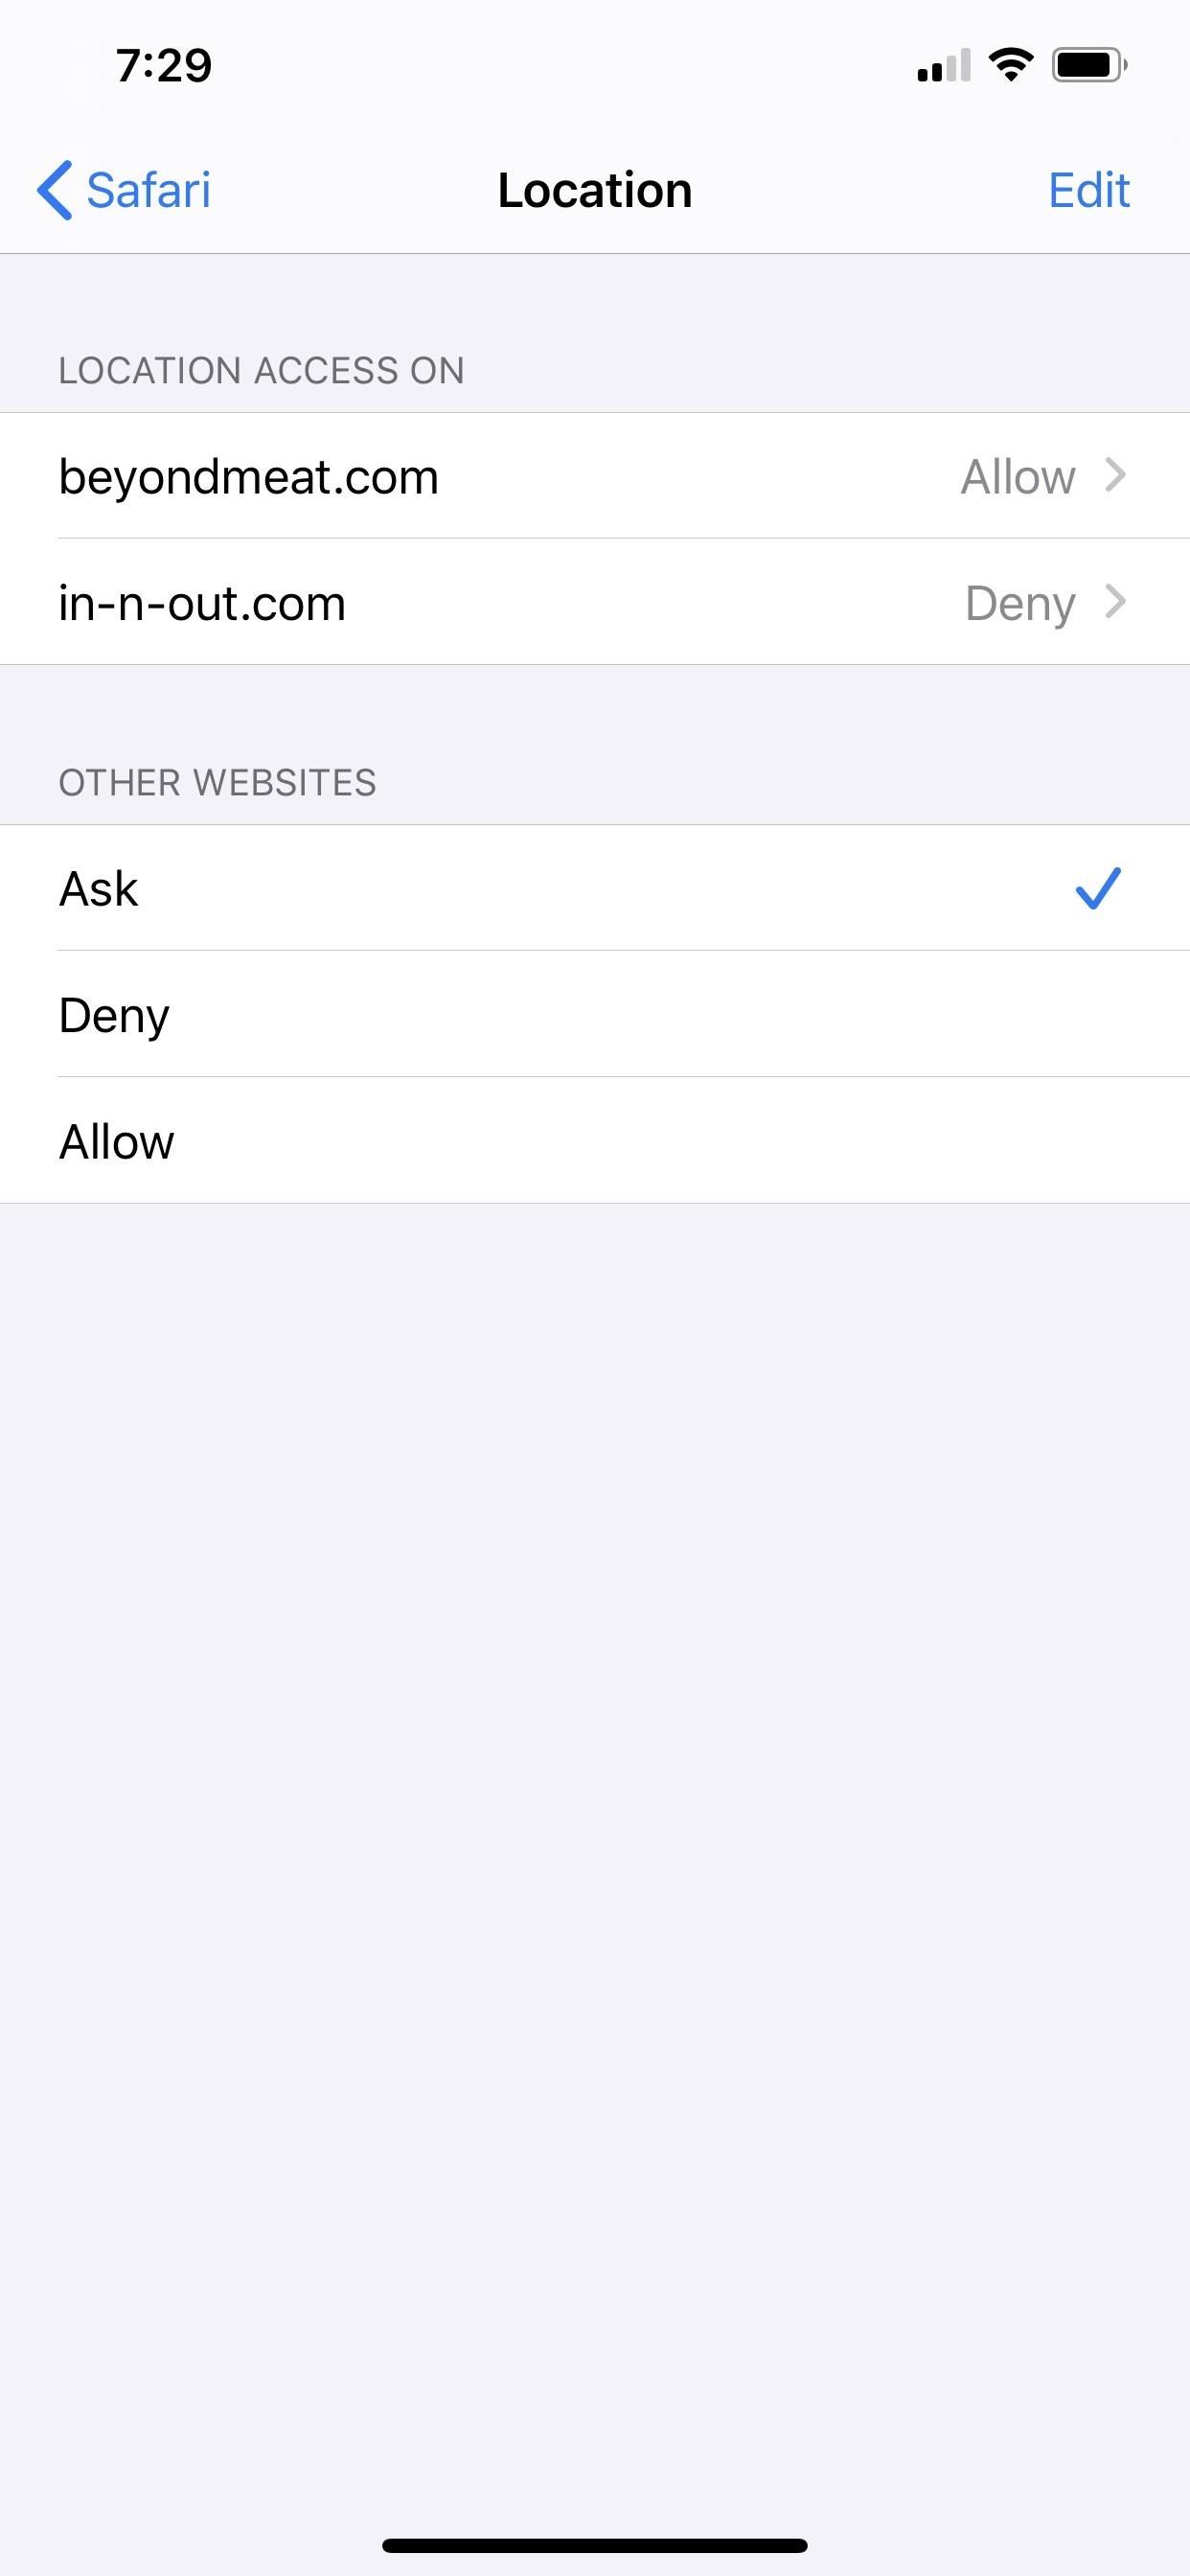 How to Customize Camera, Microphone & Location Permissions for Specific Websites in iOS 13